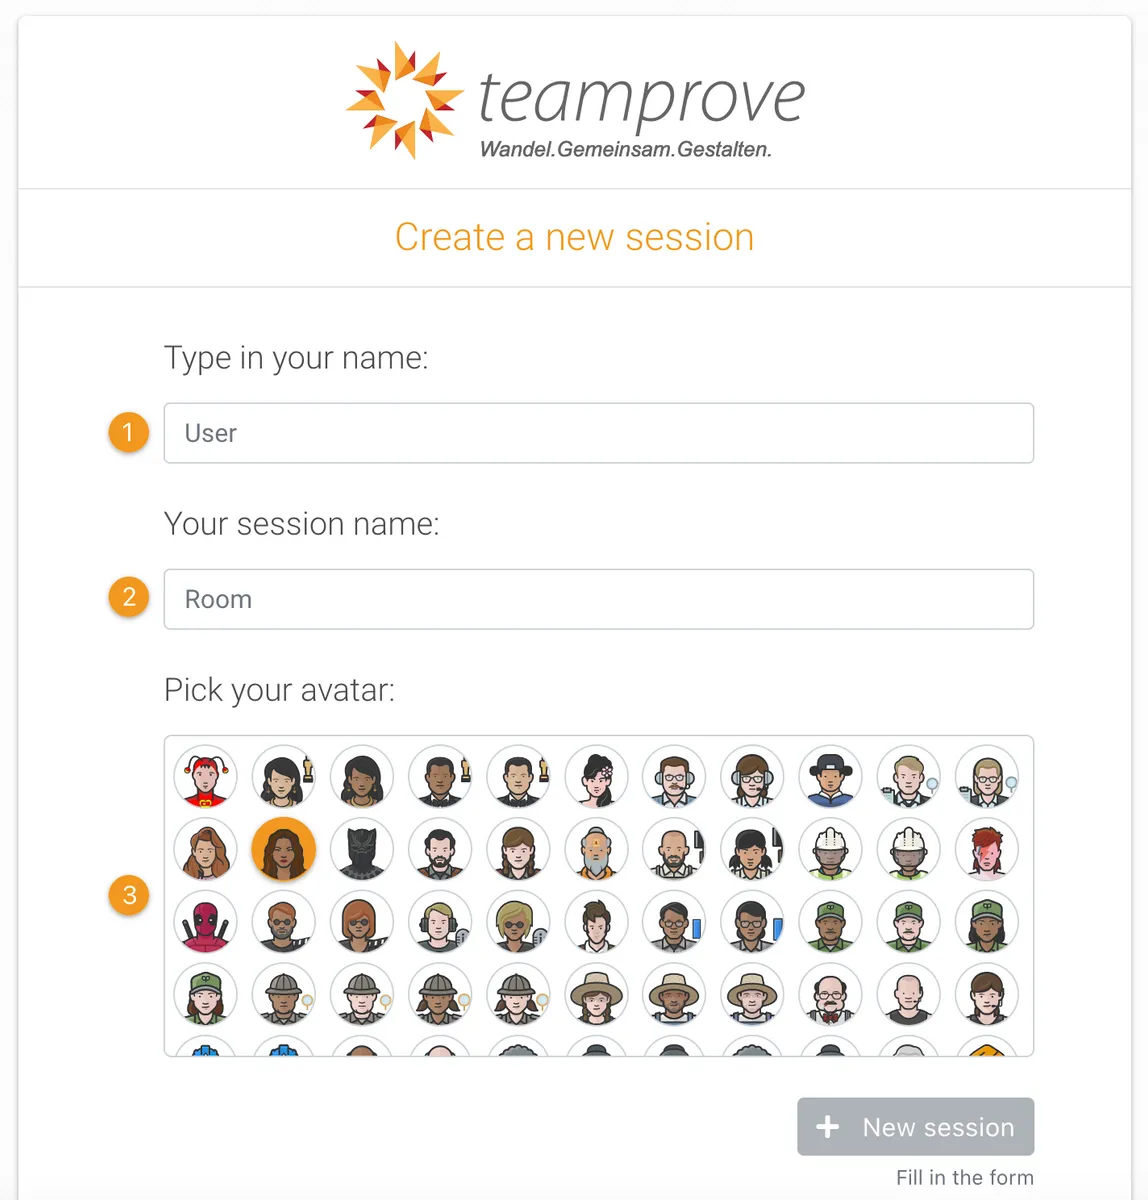 Easy to use. Just enter a session name, your user name, pick an avatar and start interacting during your online meetings